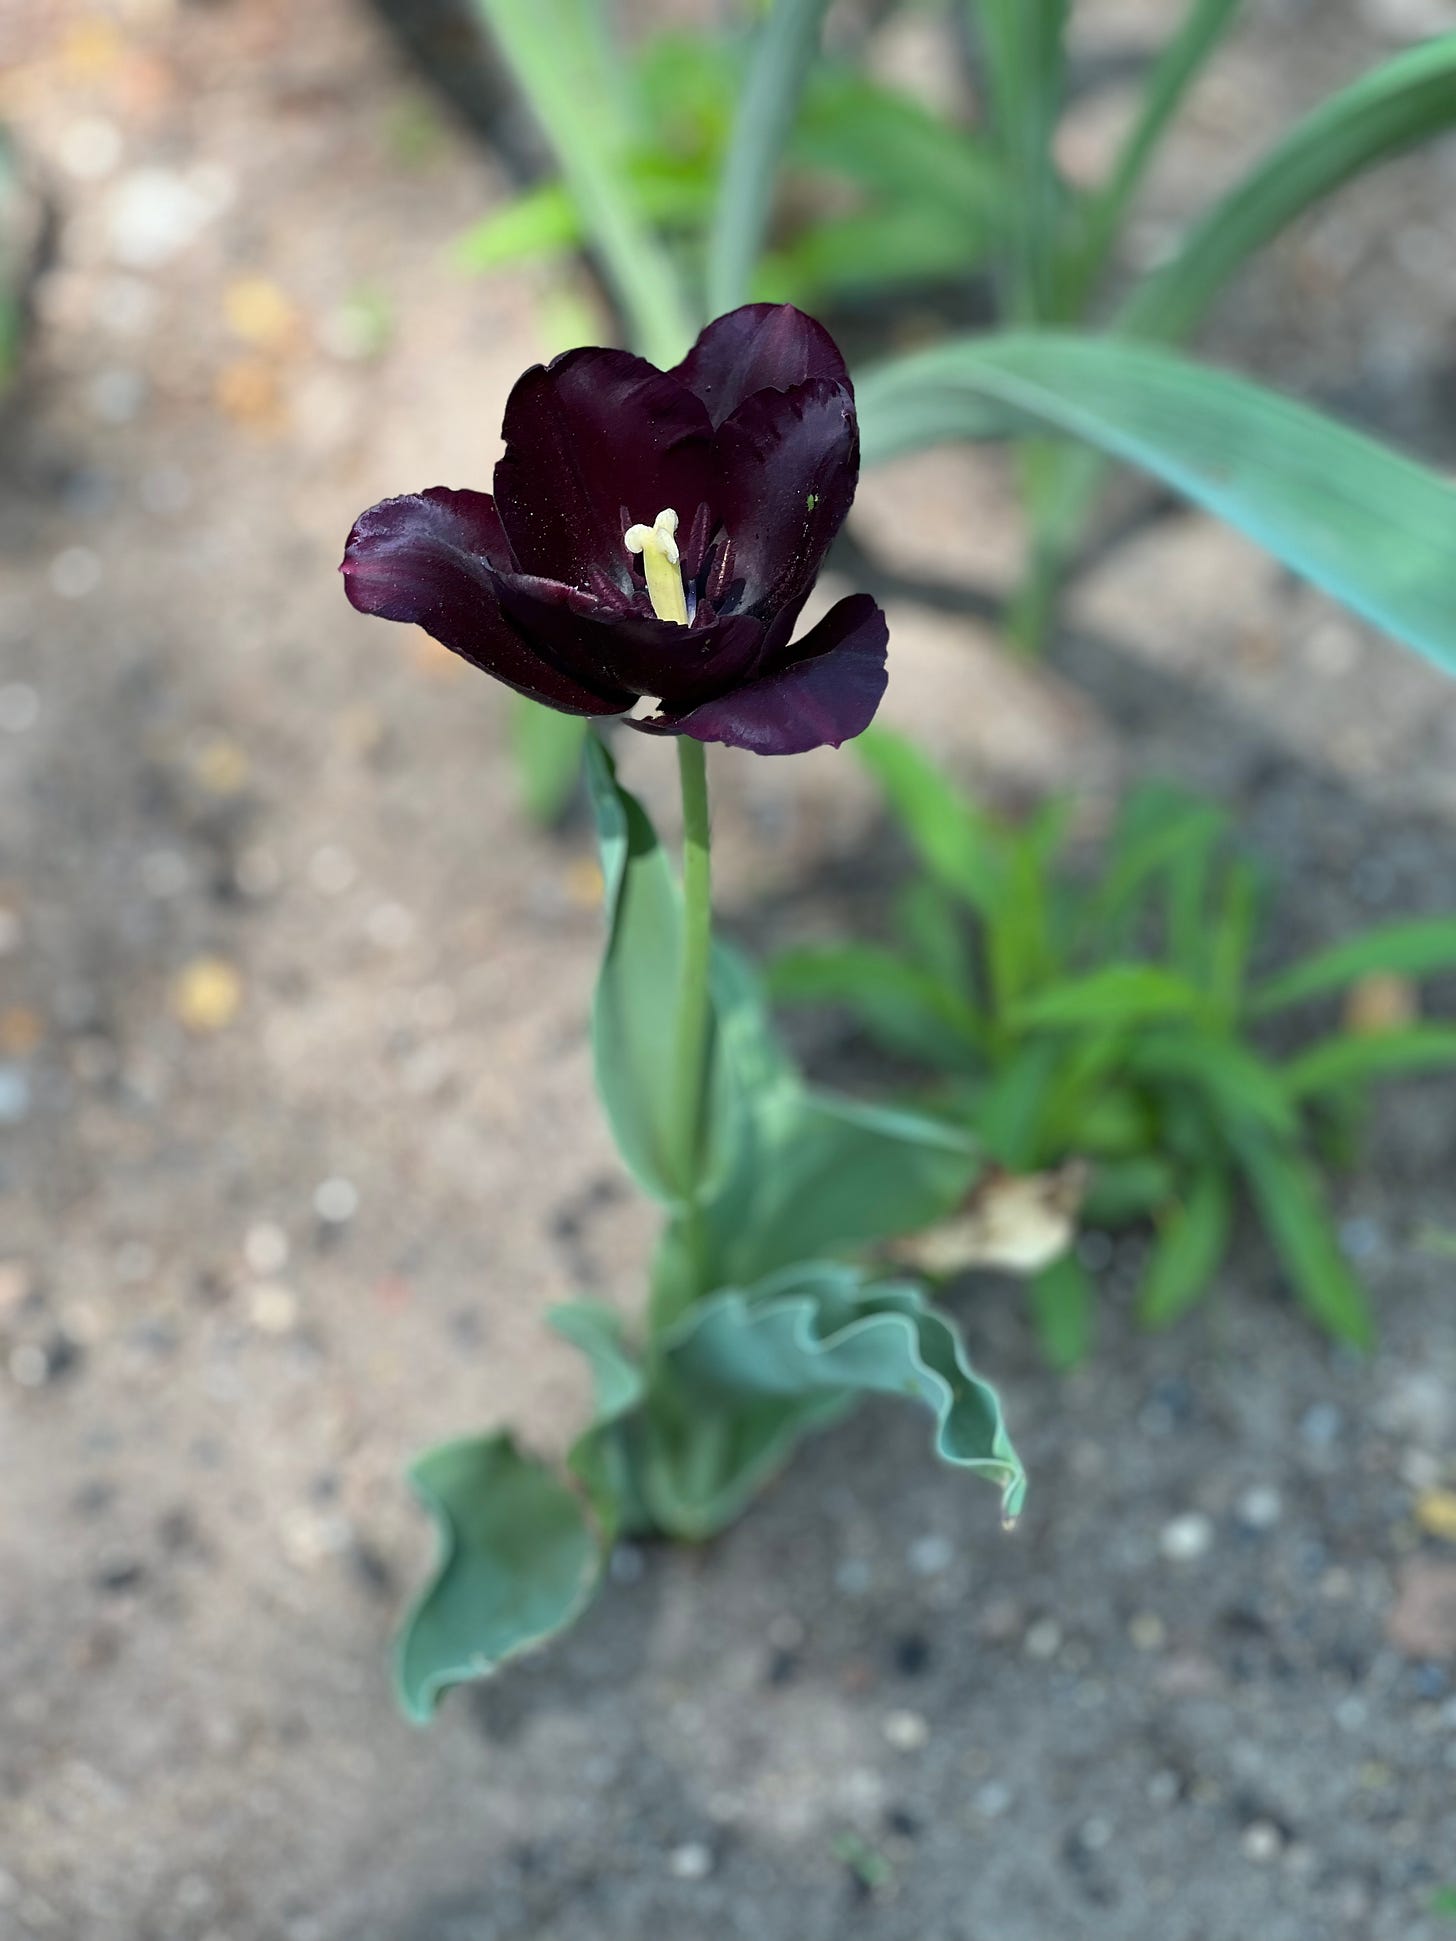 A single aubergine-colored tulip with open petals, green stem and ruffled leaves